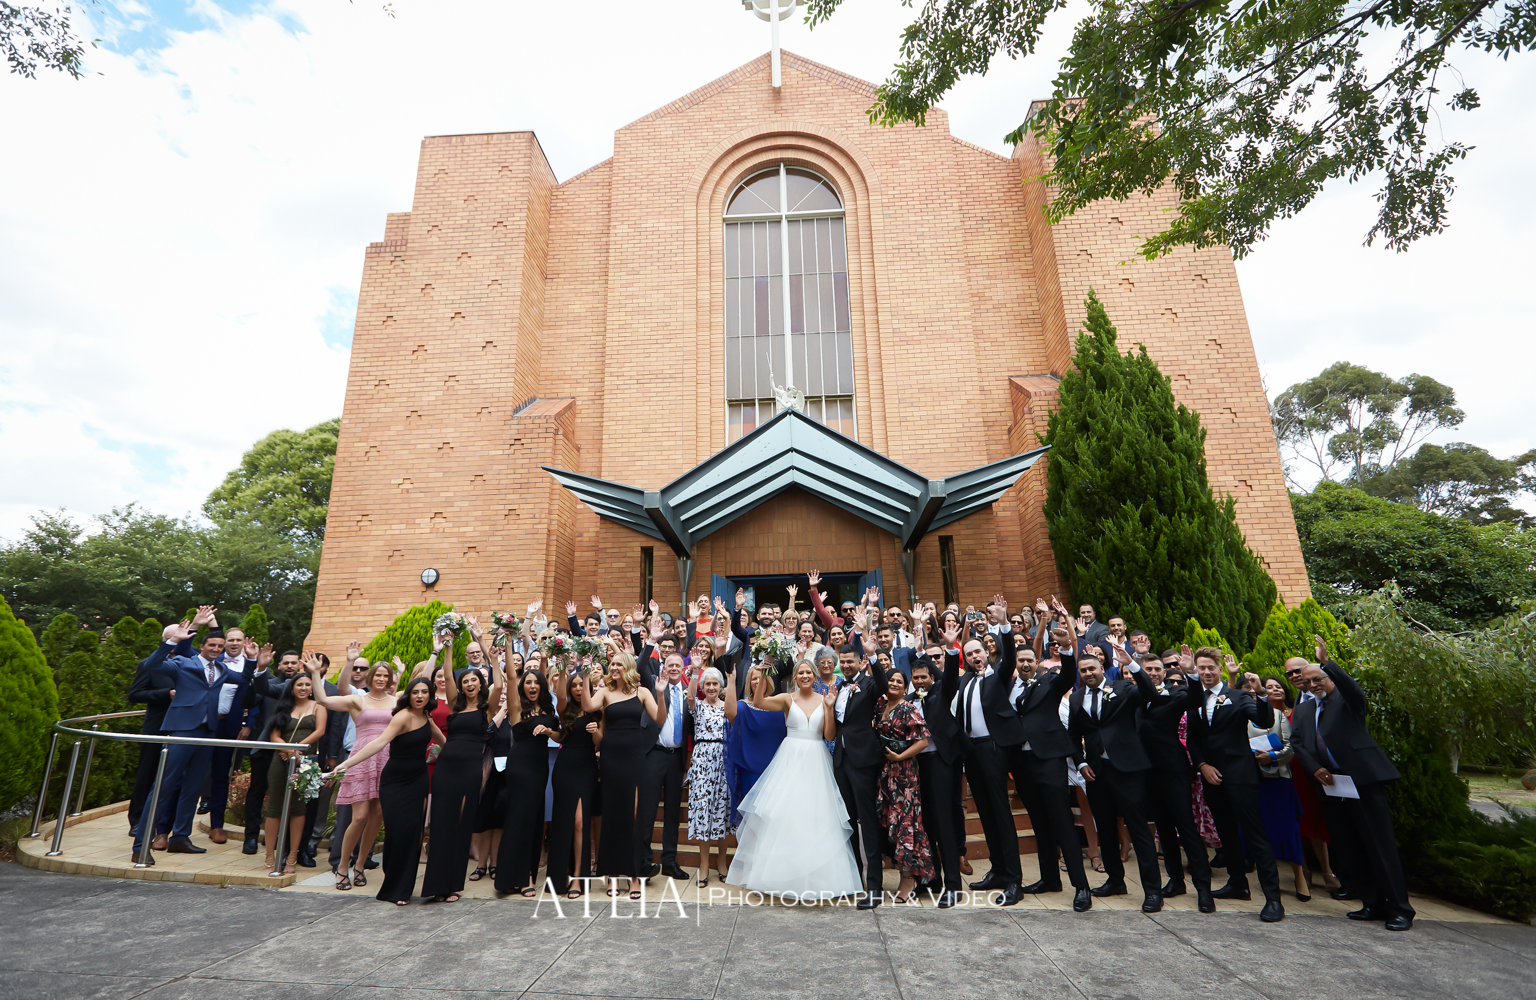 , The Ivory Wedding Photography Melbourne by ATEIA Photography &#038; Video